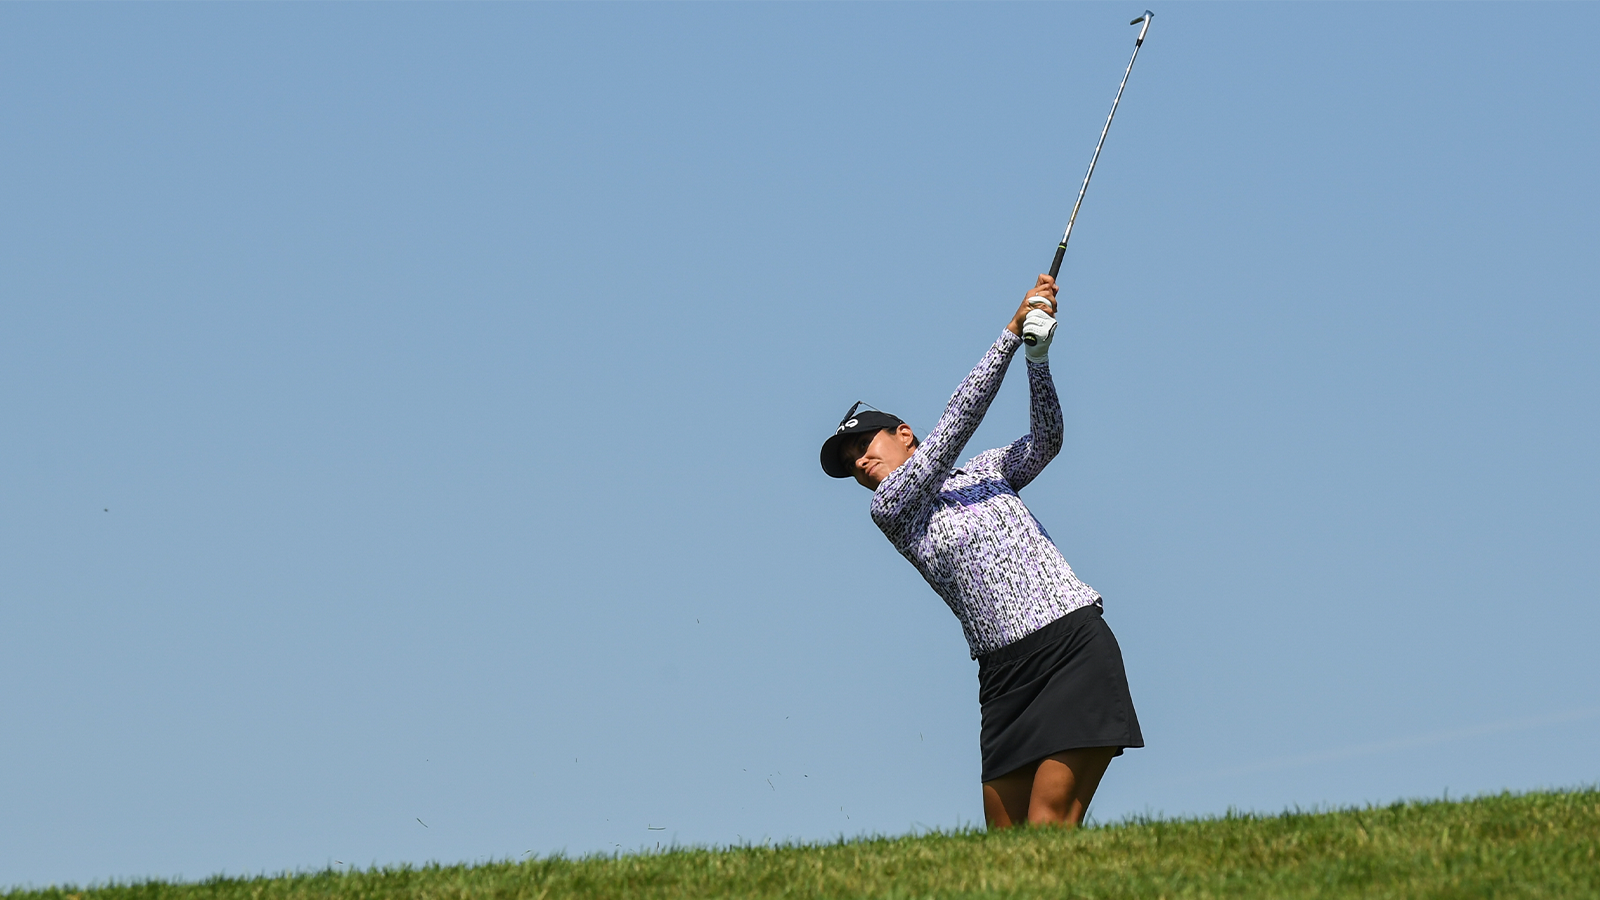 Paula Reto of South Africa hits her shot from the fairway on the ninth hole during the final round for the 2022 KPMG Women's PGA Championship at Congressional Country Club on June 26, 2022 in Bethesda, Maryland. (Photo by Montana Pritchard/PGA of America)